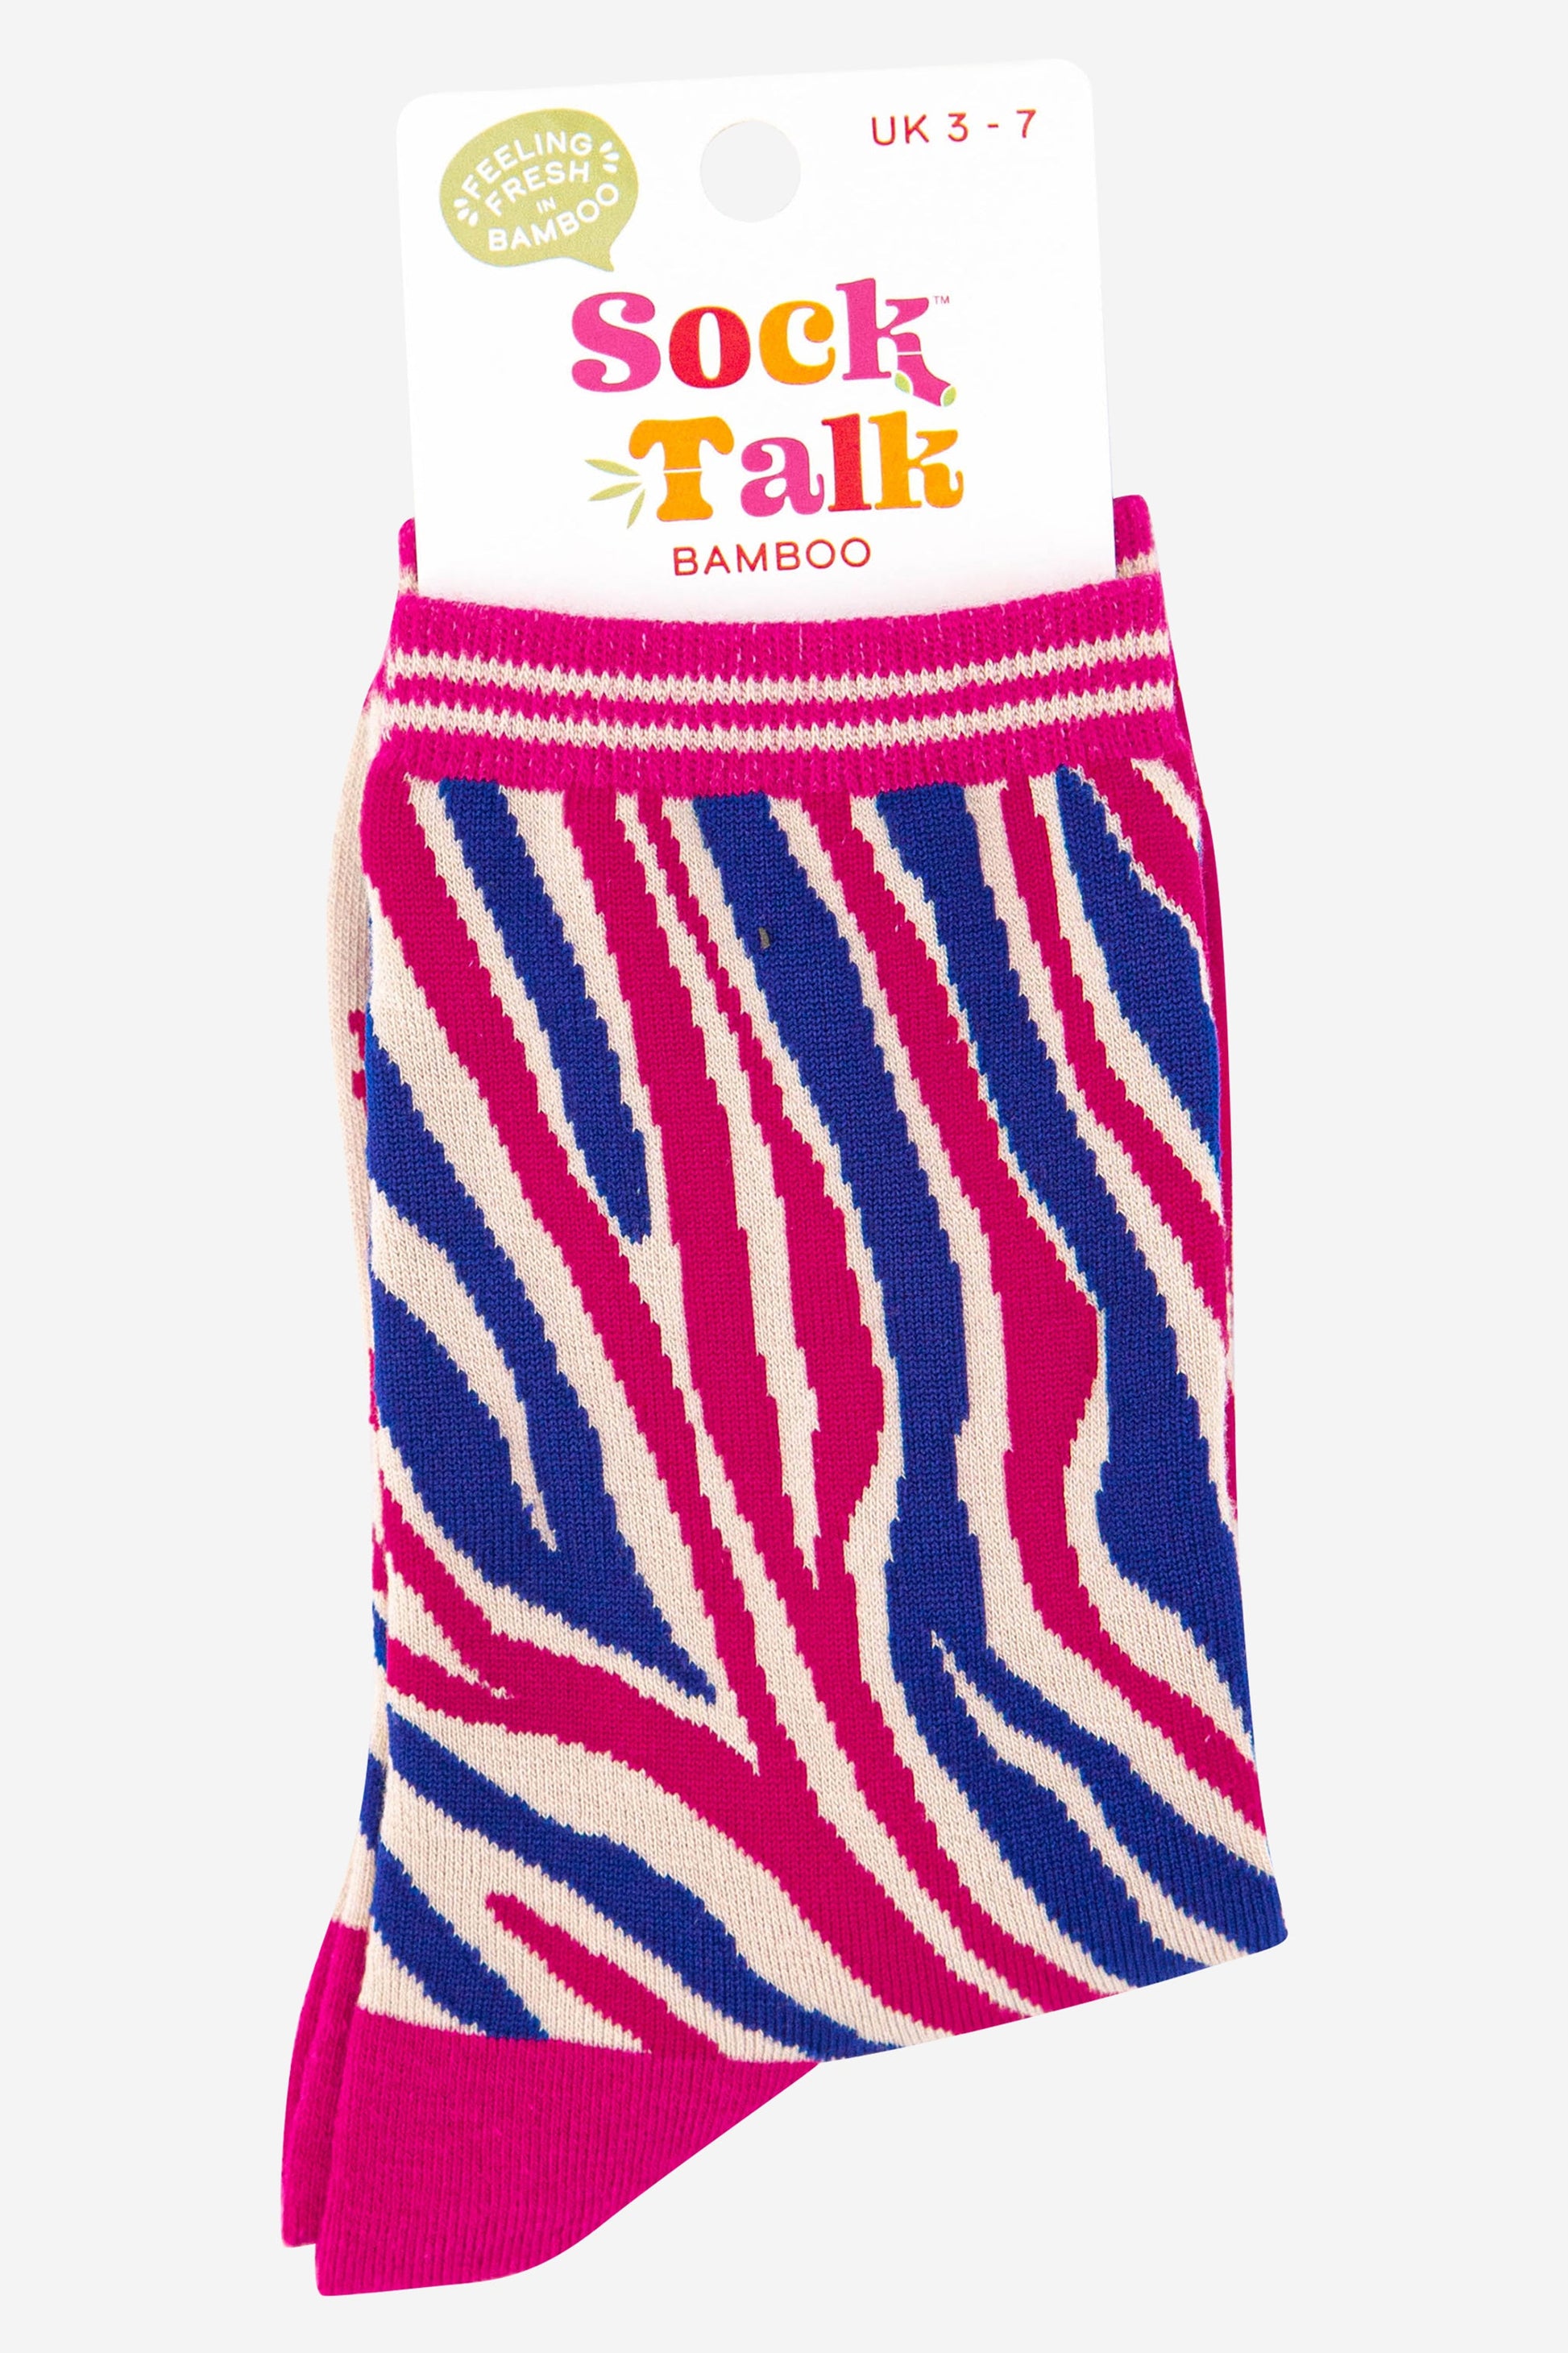 zebra print bamboo ankle socks in blue and pink uk size 3-7